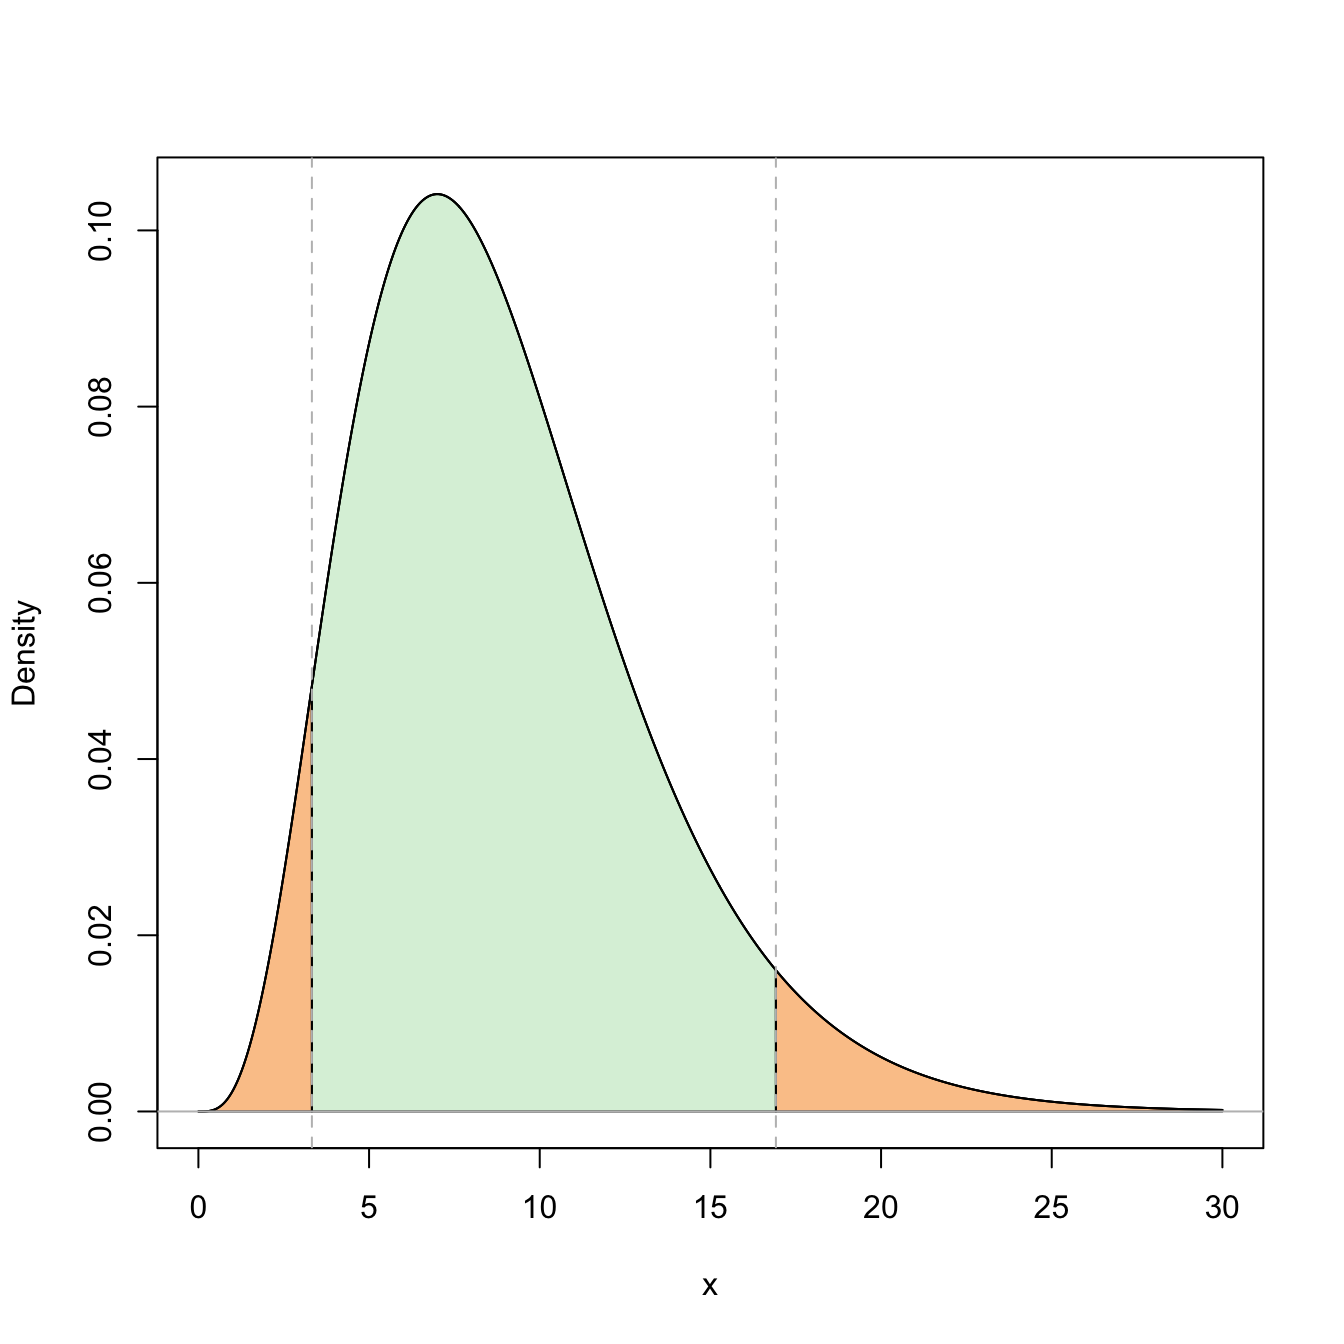 Representation of the probability \(\mathbb{P}(\chi^2_{n-1;1-\alpha/2}\leq \chi^2_{n-1}\leq \chi^2_{n-1;\alpha/2})=1-\alpha\) (in green) and its complementary (in orange) for \(\alpha=0.10\) and \(n=10\).